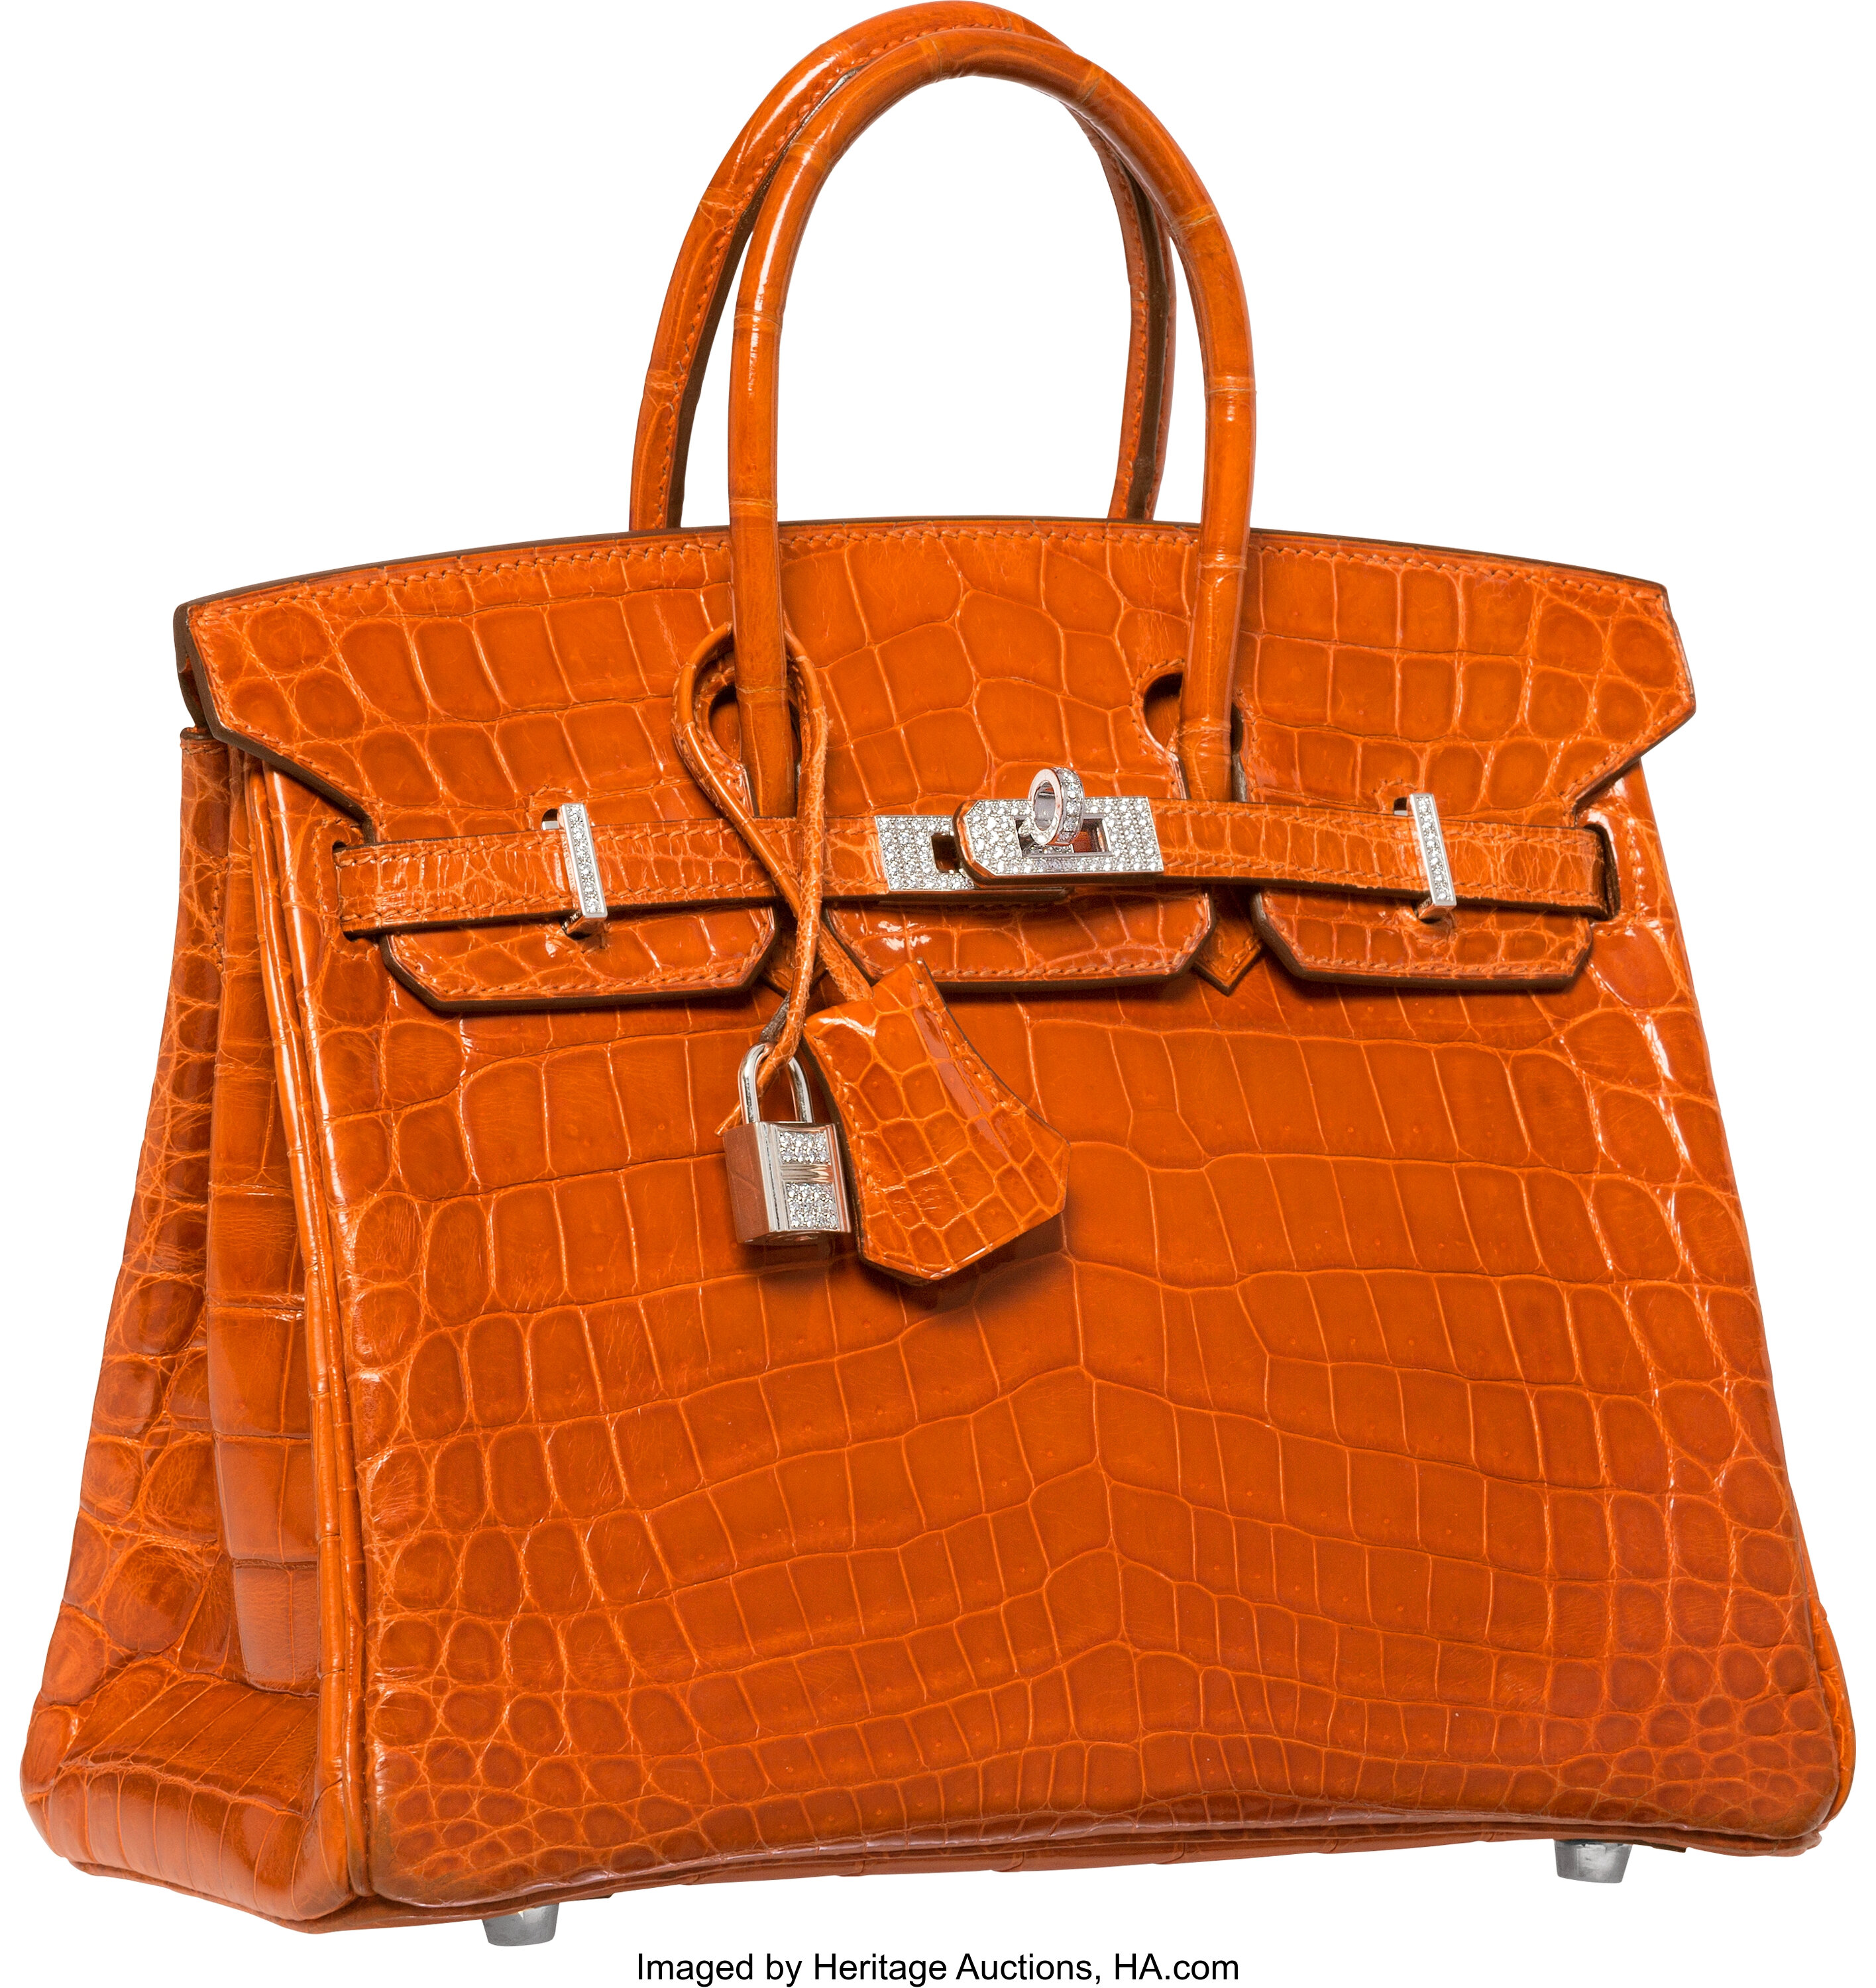 Crocodile Hermes Birkin bag snapped up for £125,000 at first